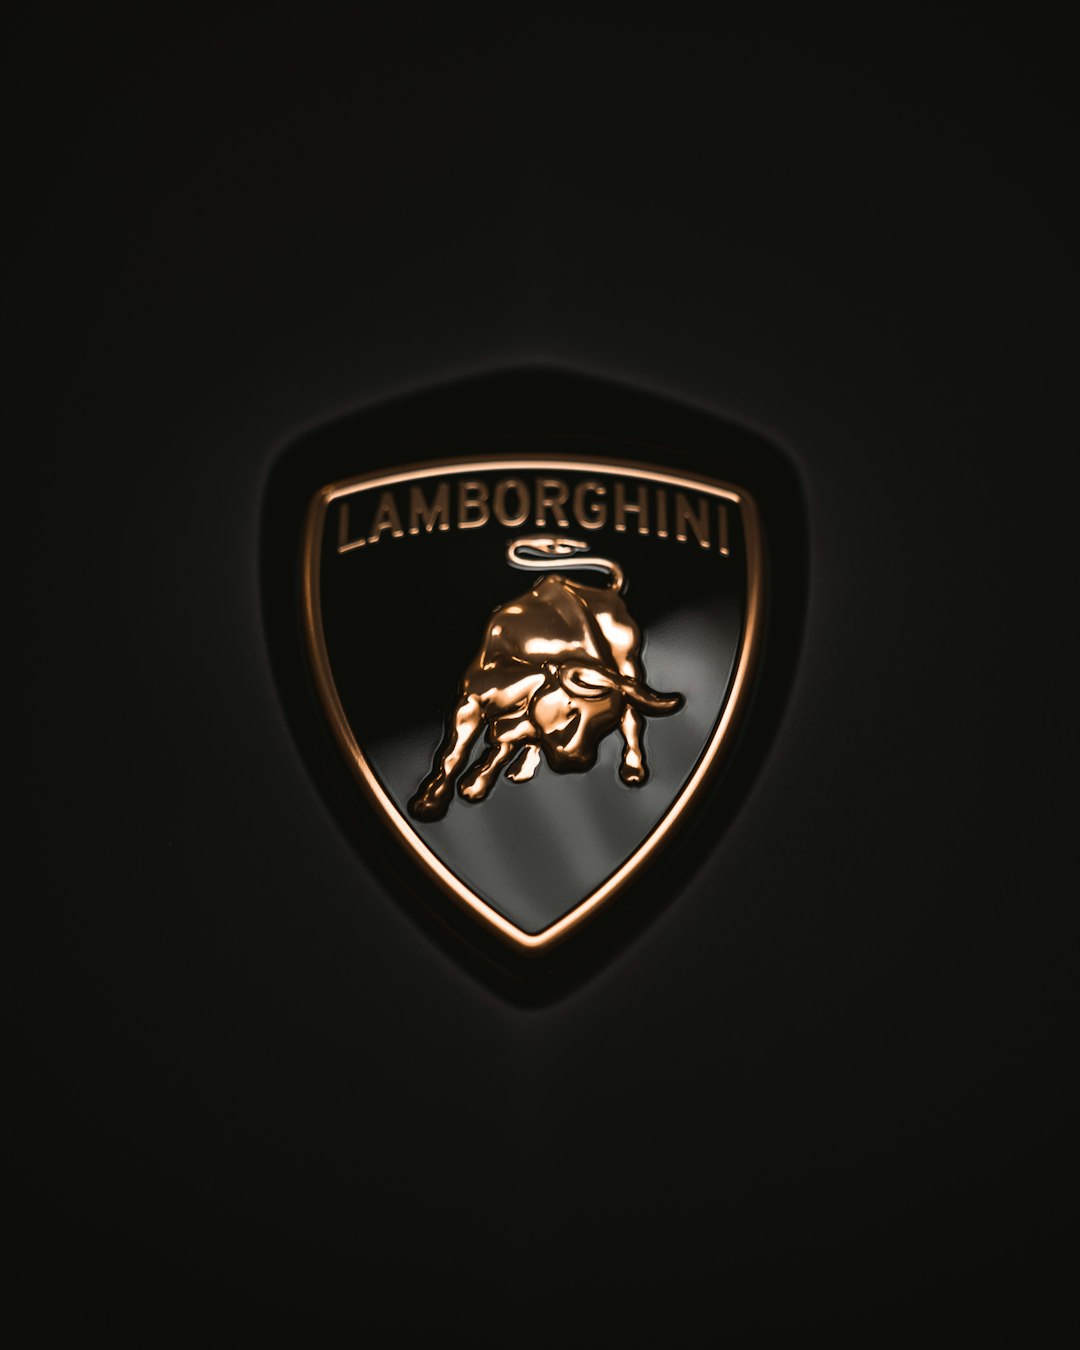 The Lamborghini Aventador is a sleek and powerful supercar that exudes both style and performance.